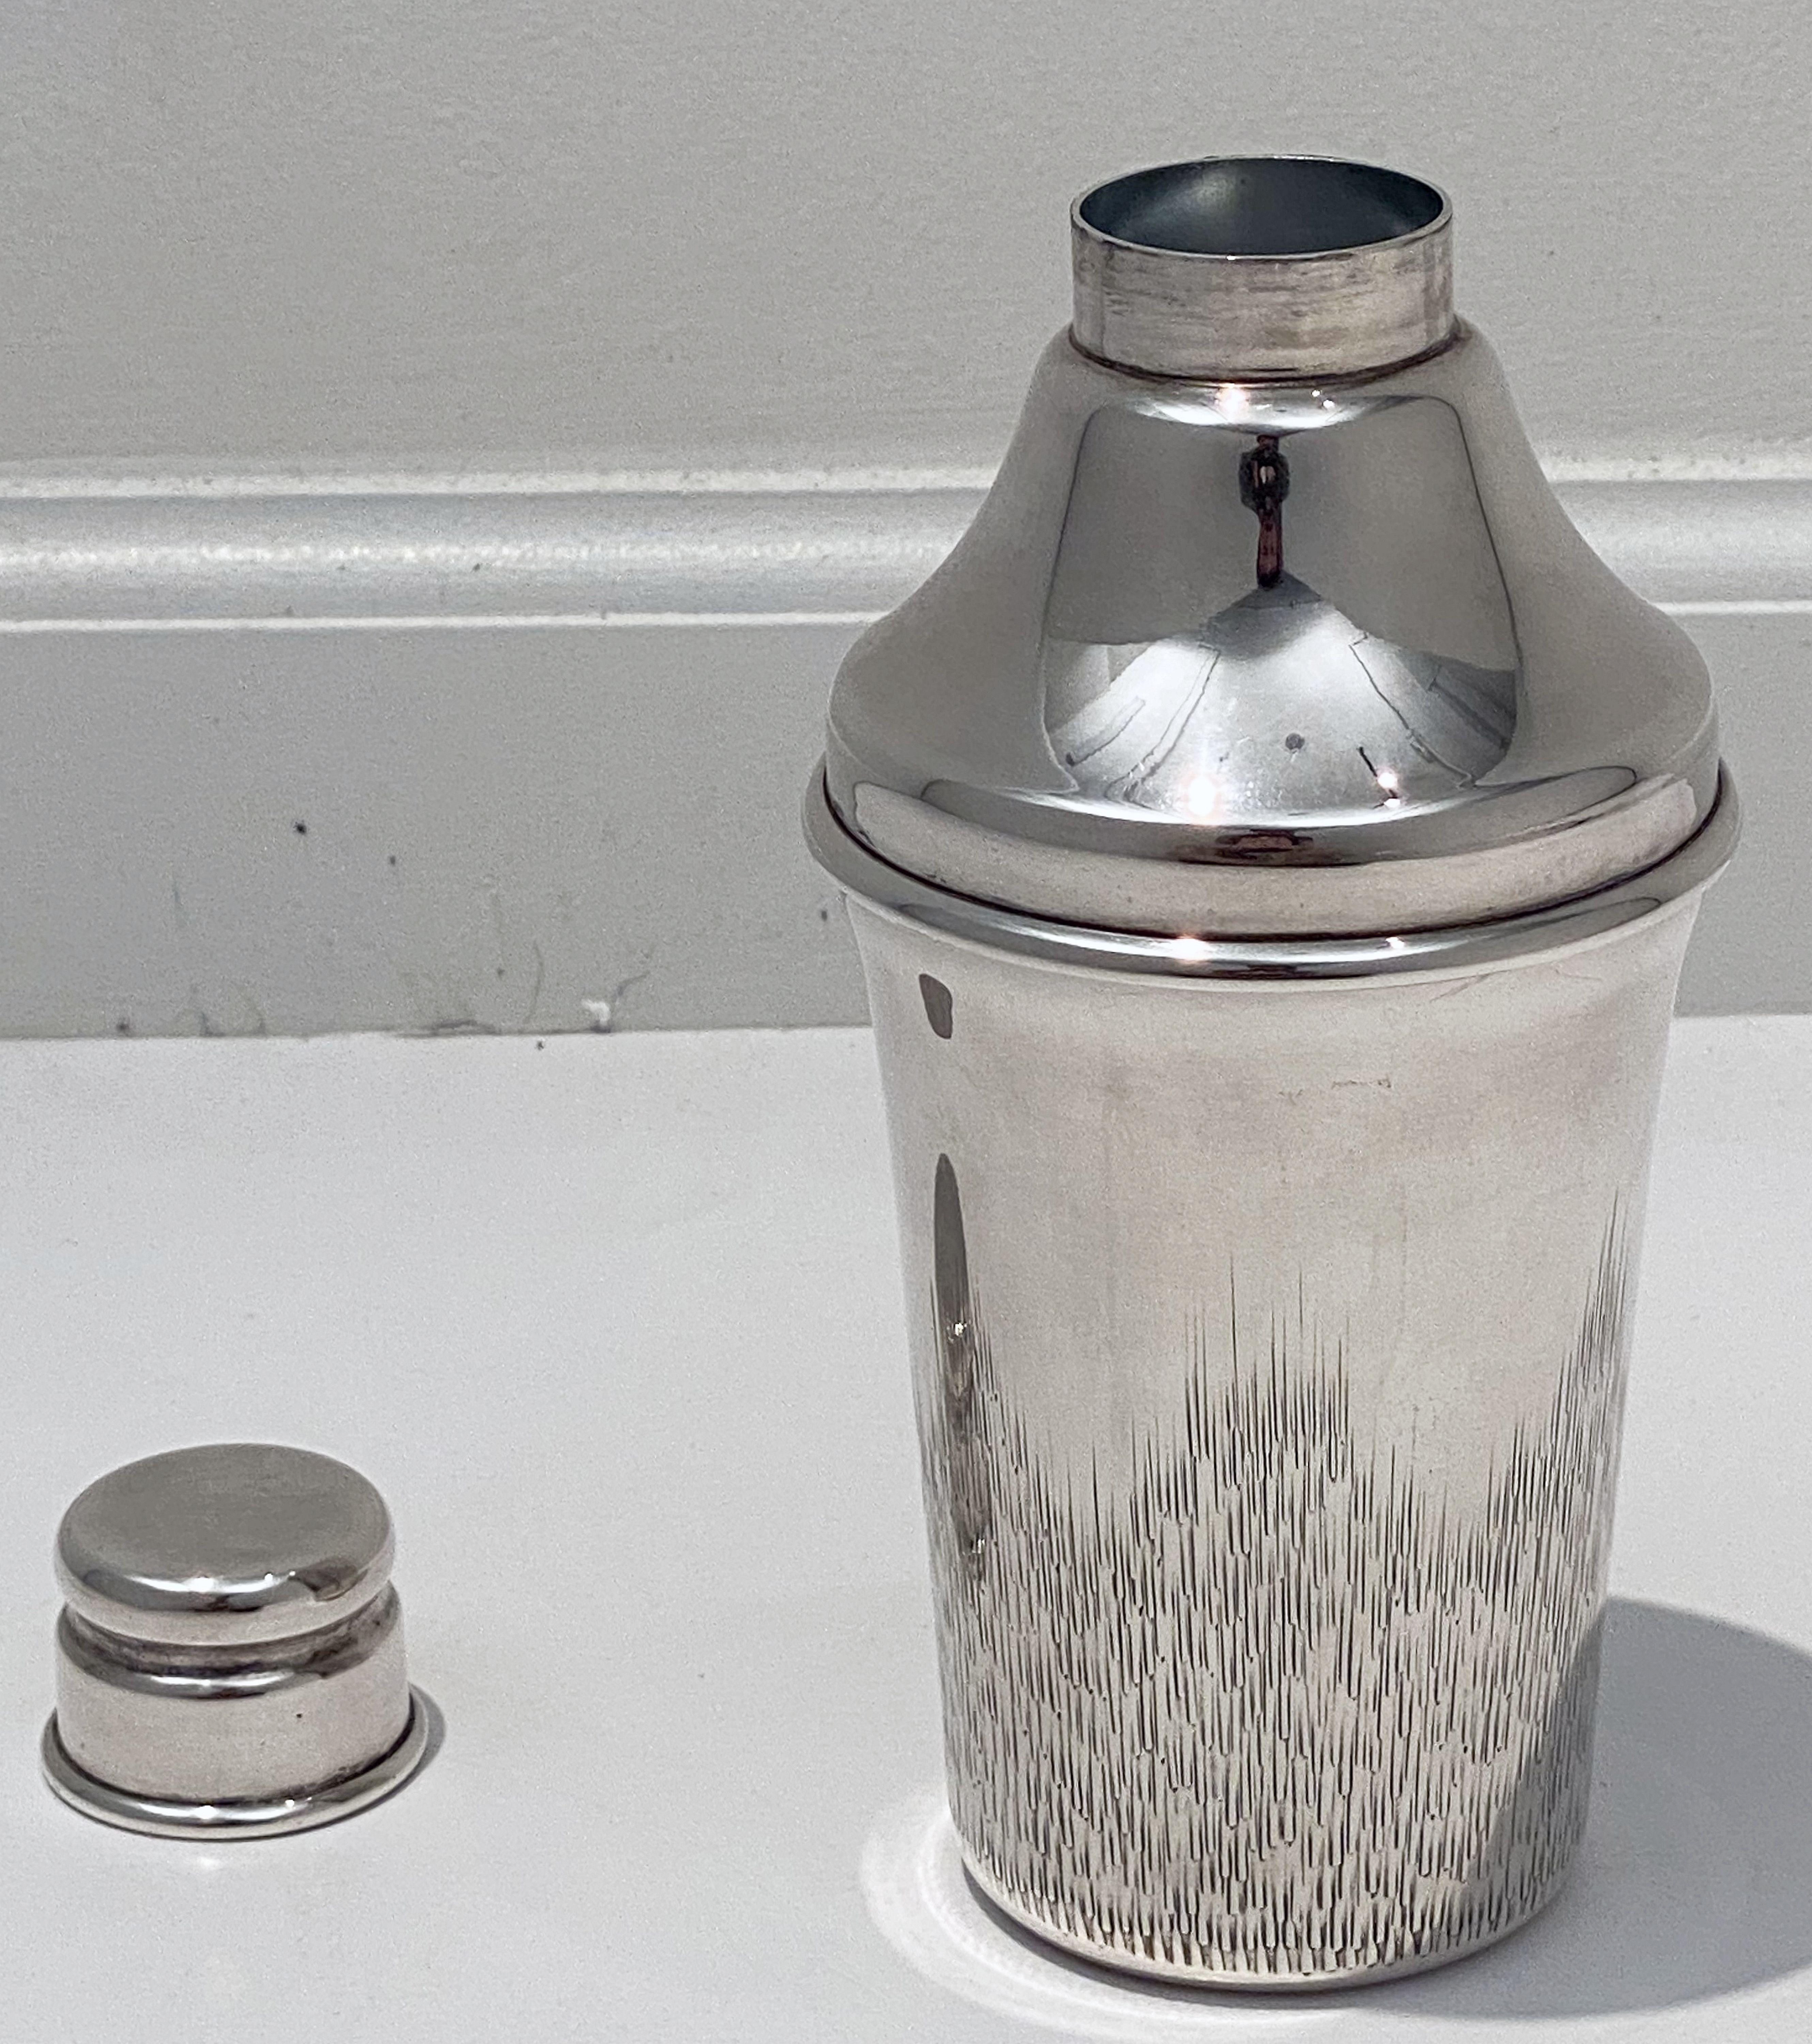 A vintage English cylindrical martini or cocktail shaker of fine plate silver, with engine-turned removable CAP and strainer.

Marked on base: PSL, Parkin Silversmiths, Sheffield, England (or E.H. Parkin & Co.)

Perfect for the bar. Even better